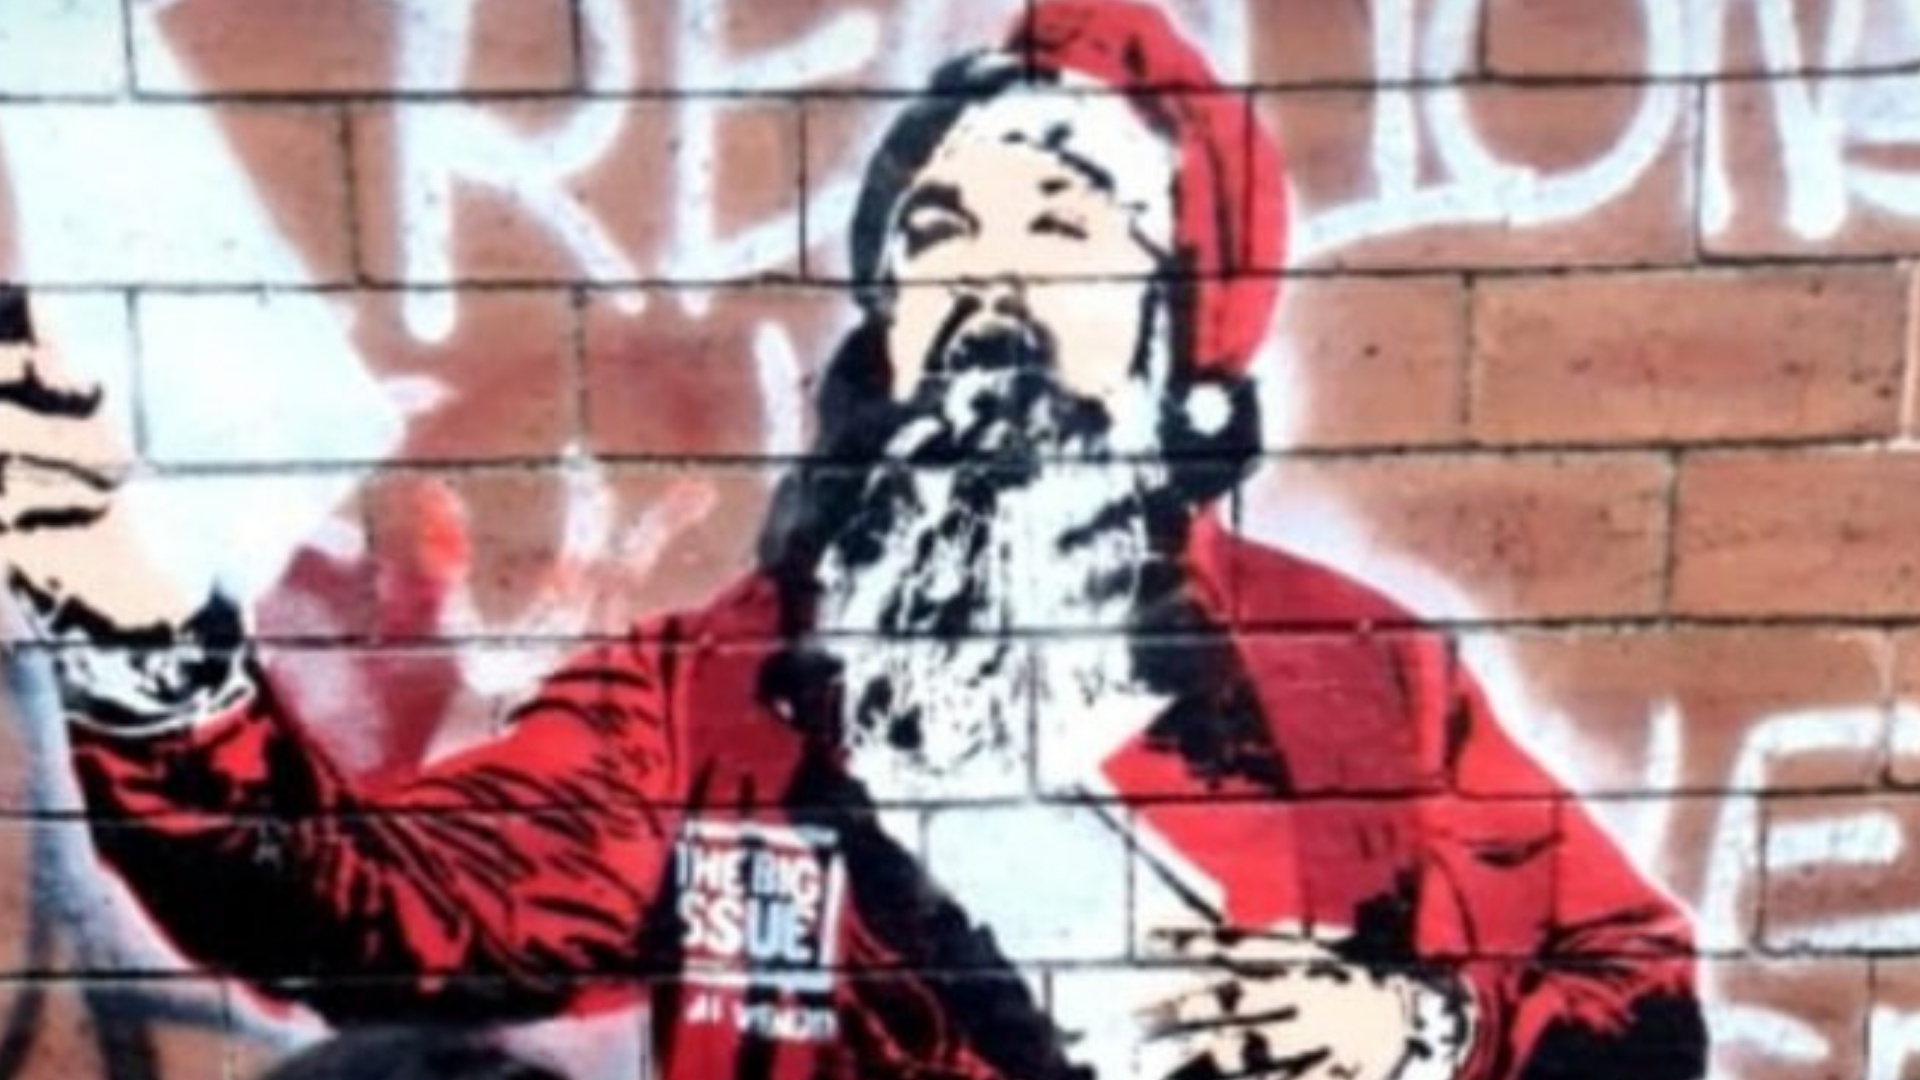 The Artwork depicting the Big Issue vendor has appeared in Leeds.